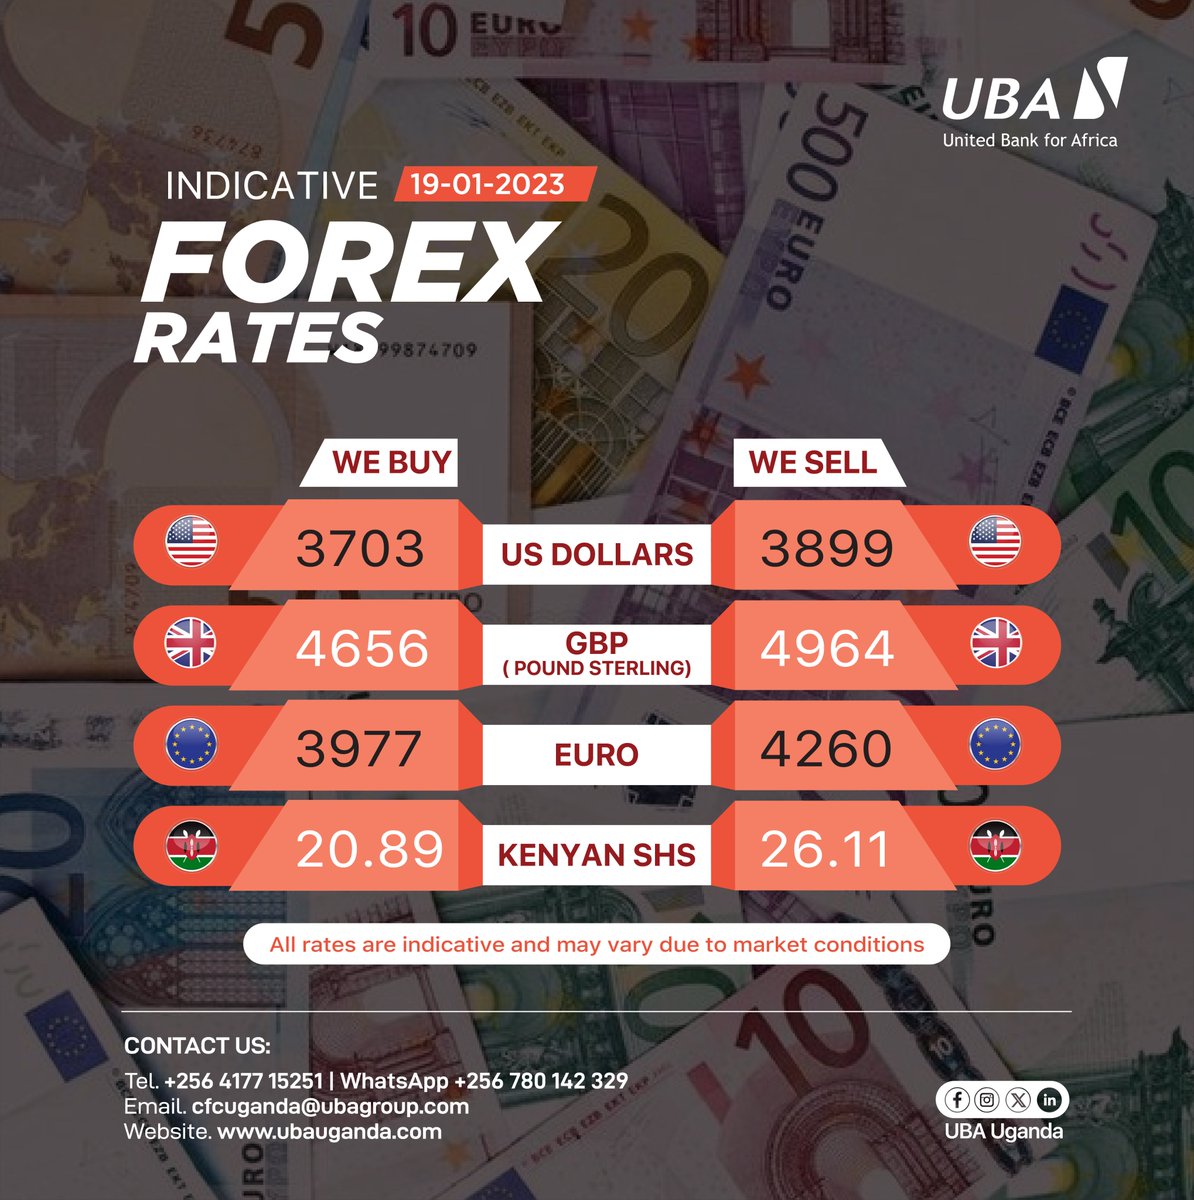 We are your trusted partners for all Forex exchanges. Visit any UBA branch today to exchange your currency. Here are today's rates. #UBAForex #AfricasGlobalBank #exchange #currencies #rates